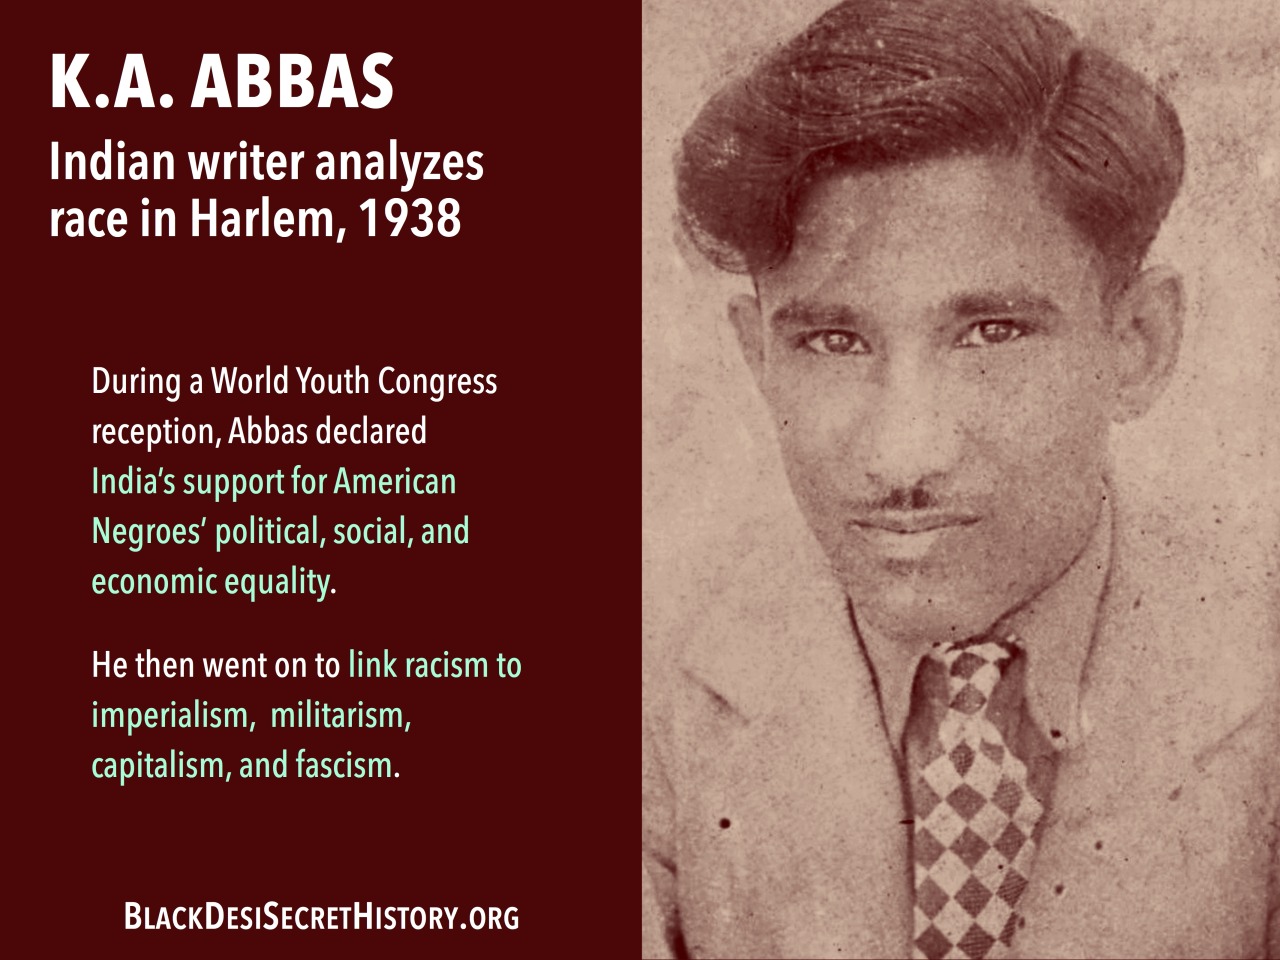 K.A. ABBAS, Indian writer analyzes race in Harlem, 1938: During a World Youth Congress reception, Abbas declared India’s support for American Negroes’ political, social, and economic equality. He then went on to link racism to imperialism,  militarism, capitalism, and fascism.